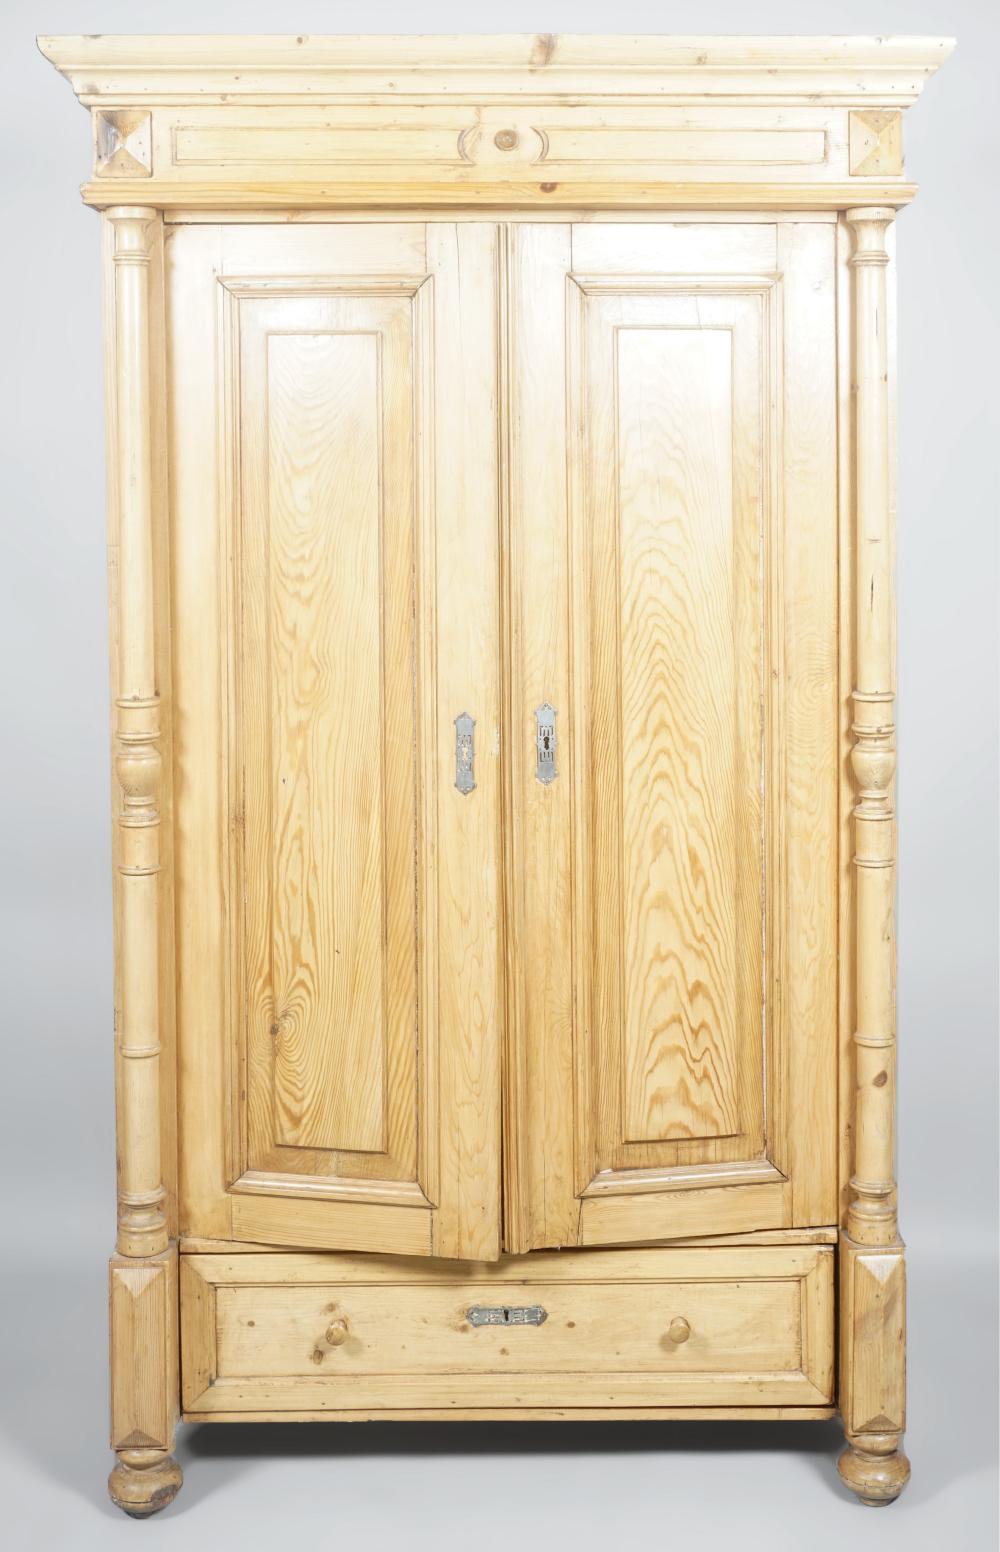 SMALL COUNTRY PINE ARMOIRE 74 X 33ced1